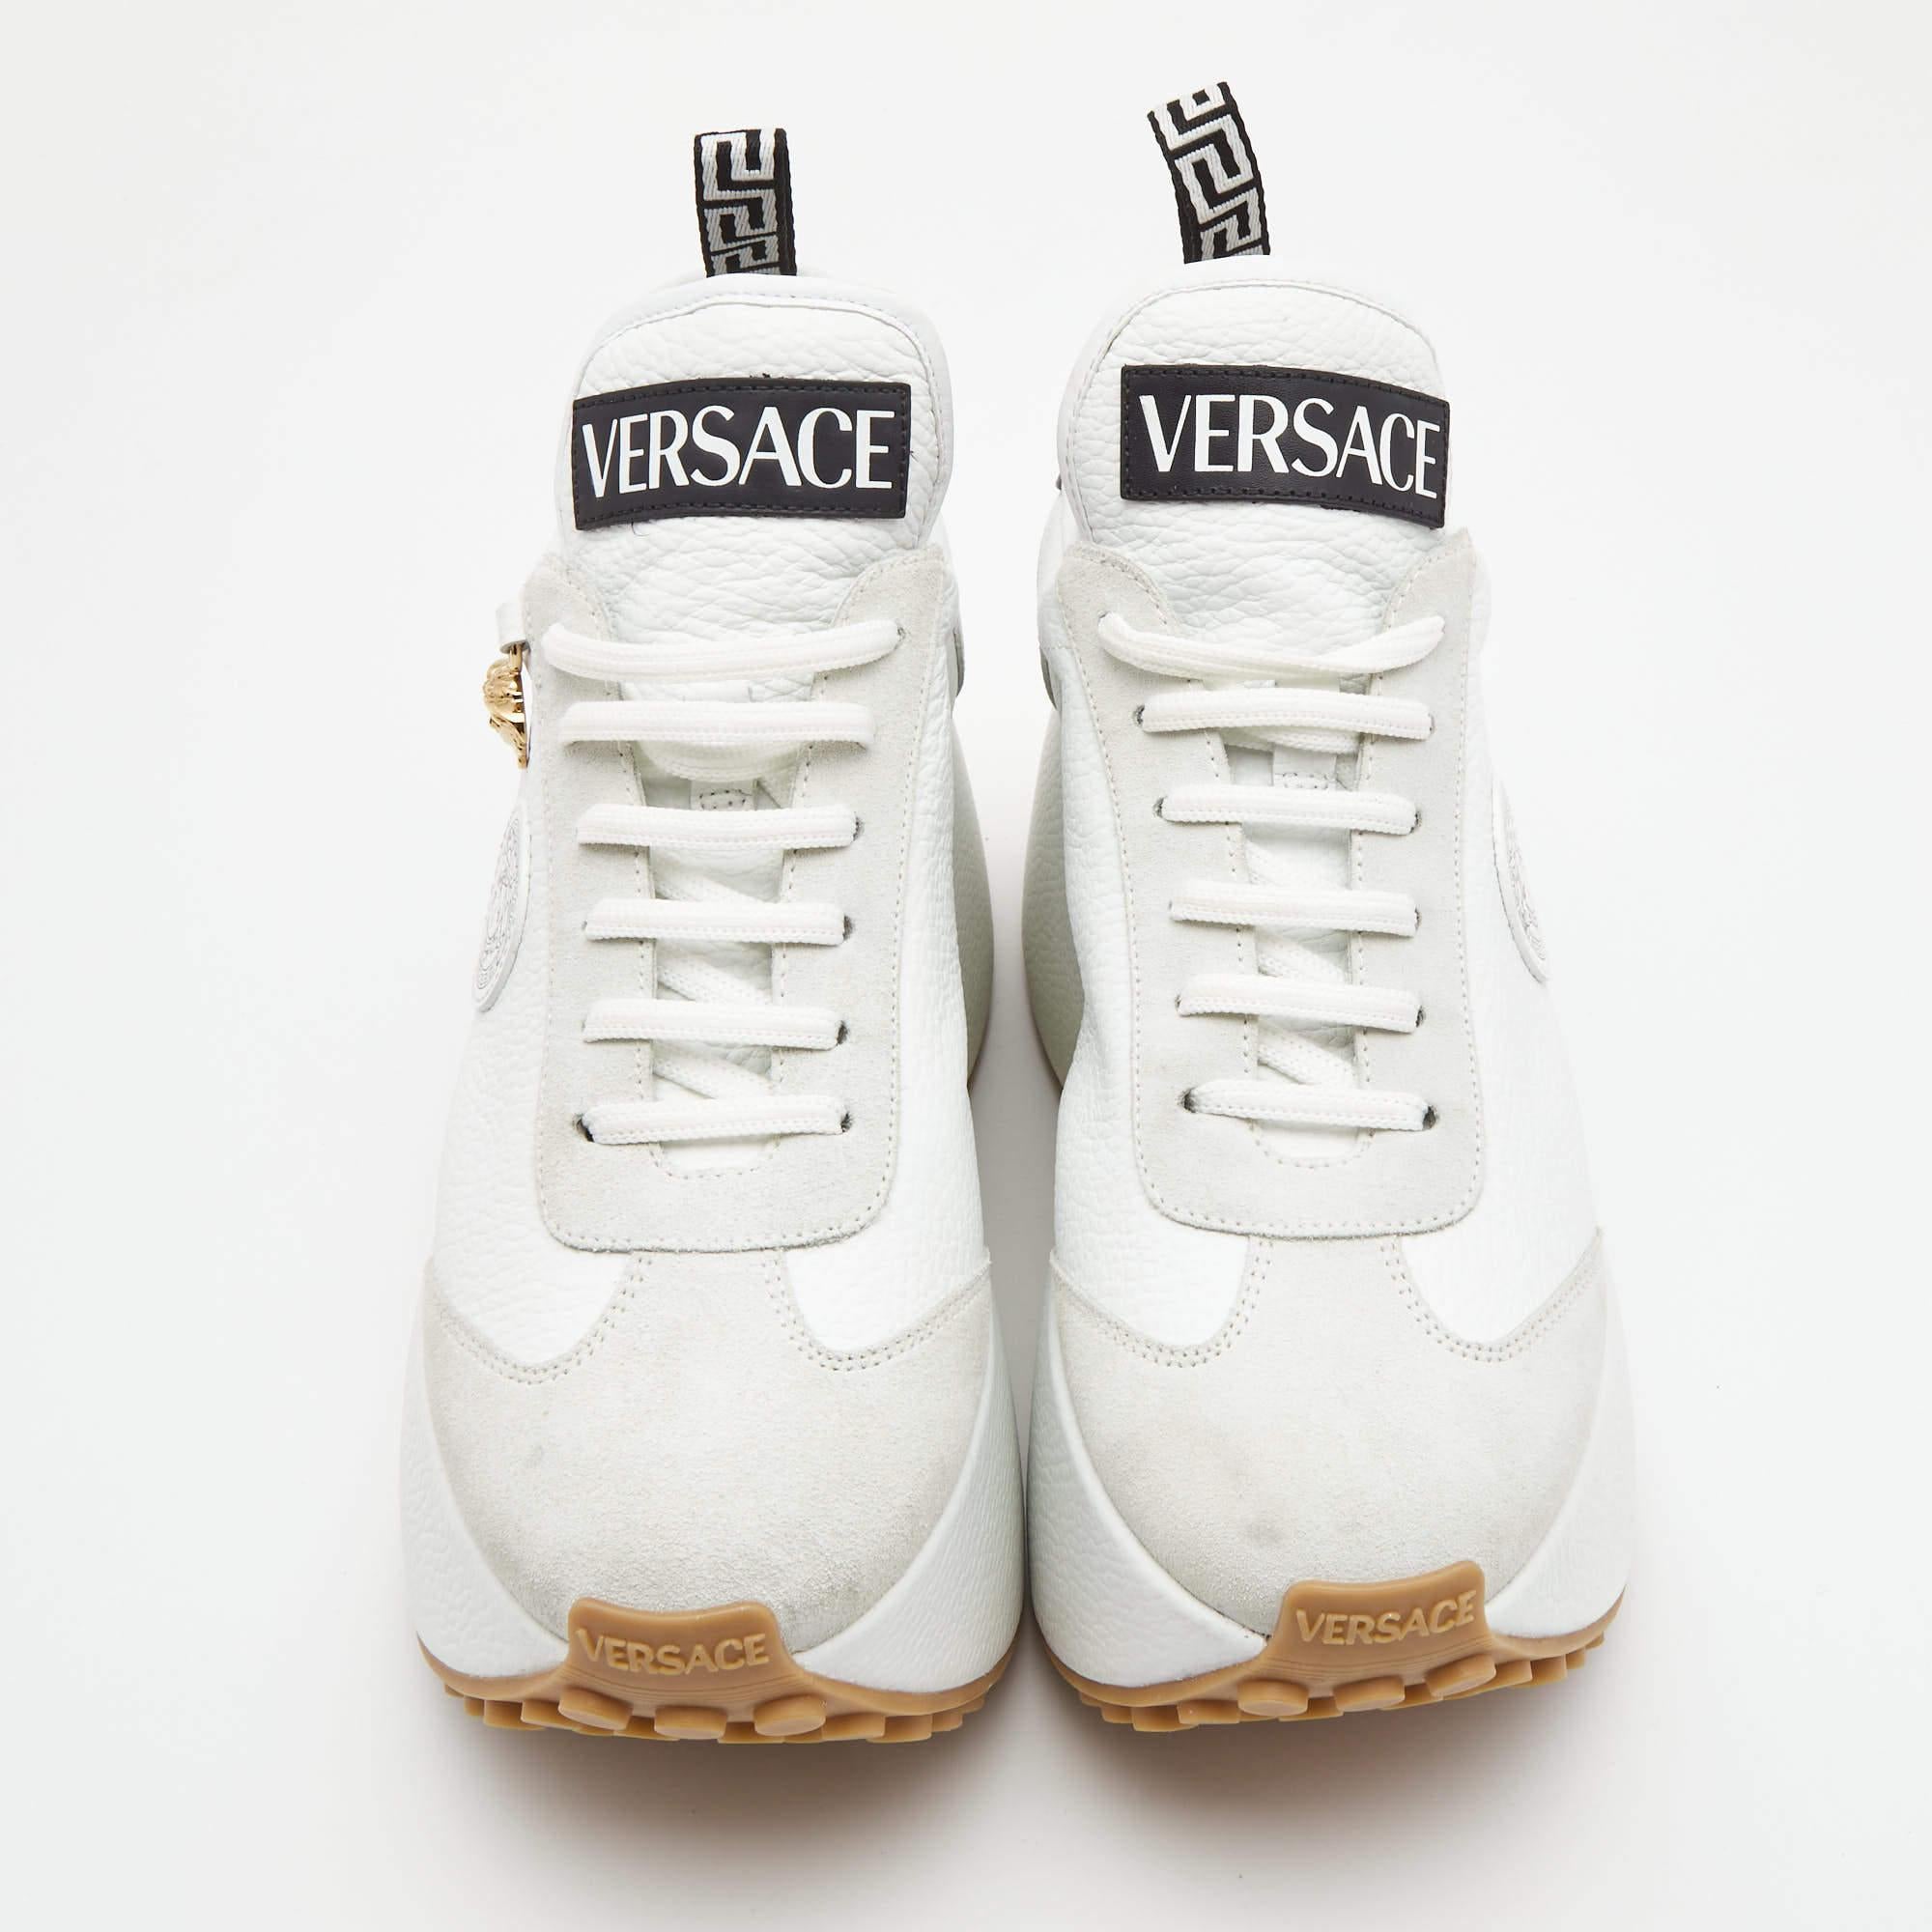 Versace sneakers are a stylish footwear choice that combines luxury and comfort. Made with premium materials, these sneakers feature a raised platform sole for added height and a bold statement. The iconic Versace logo is often displayed